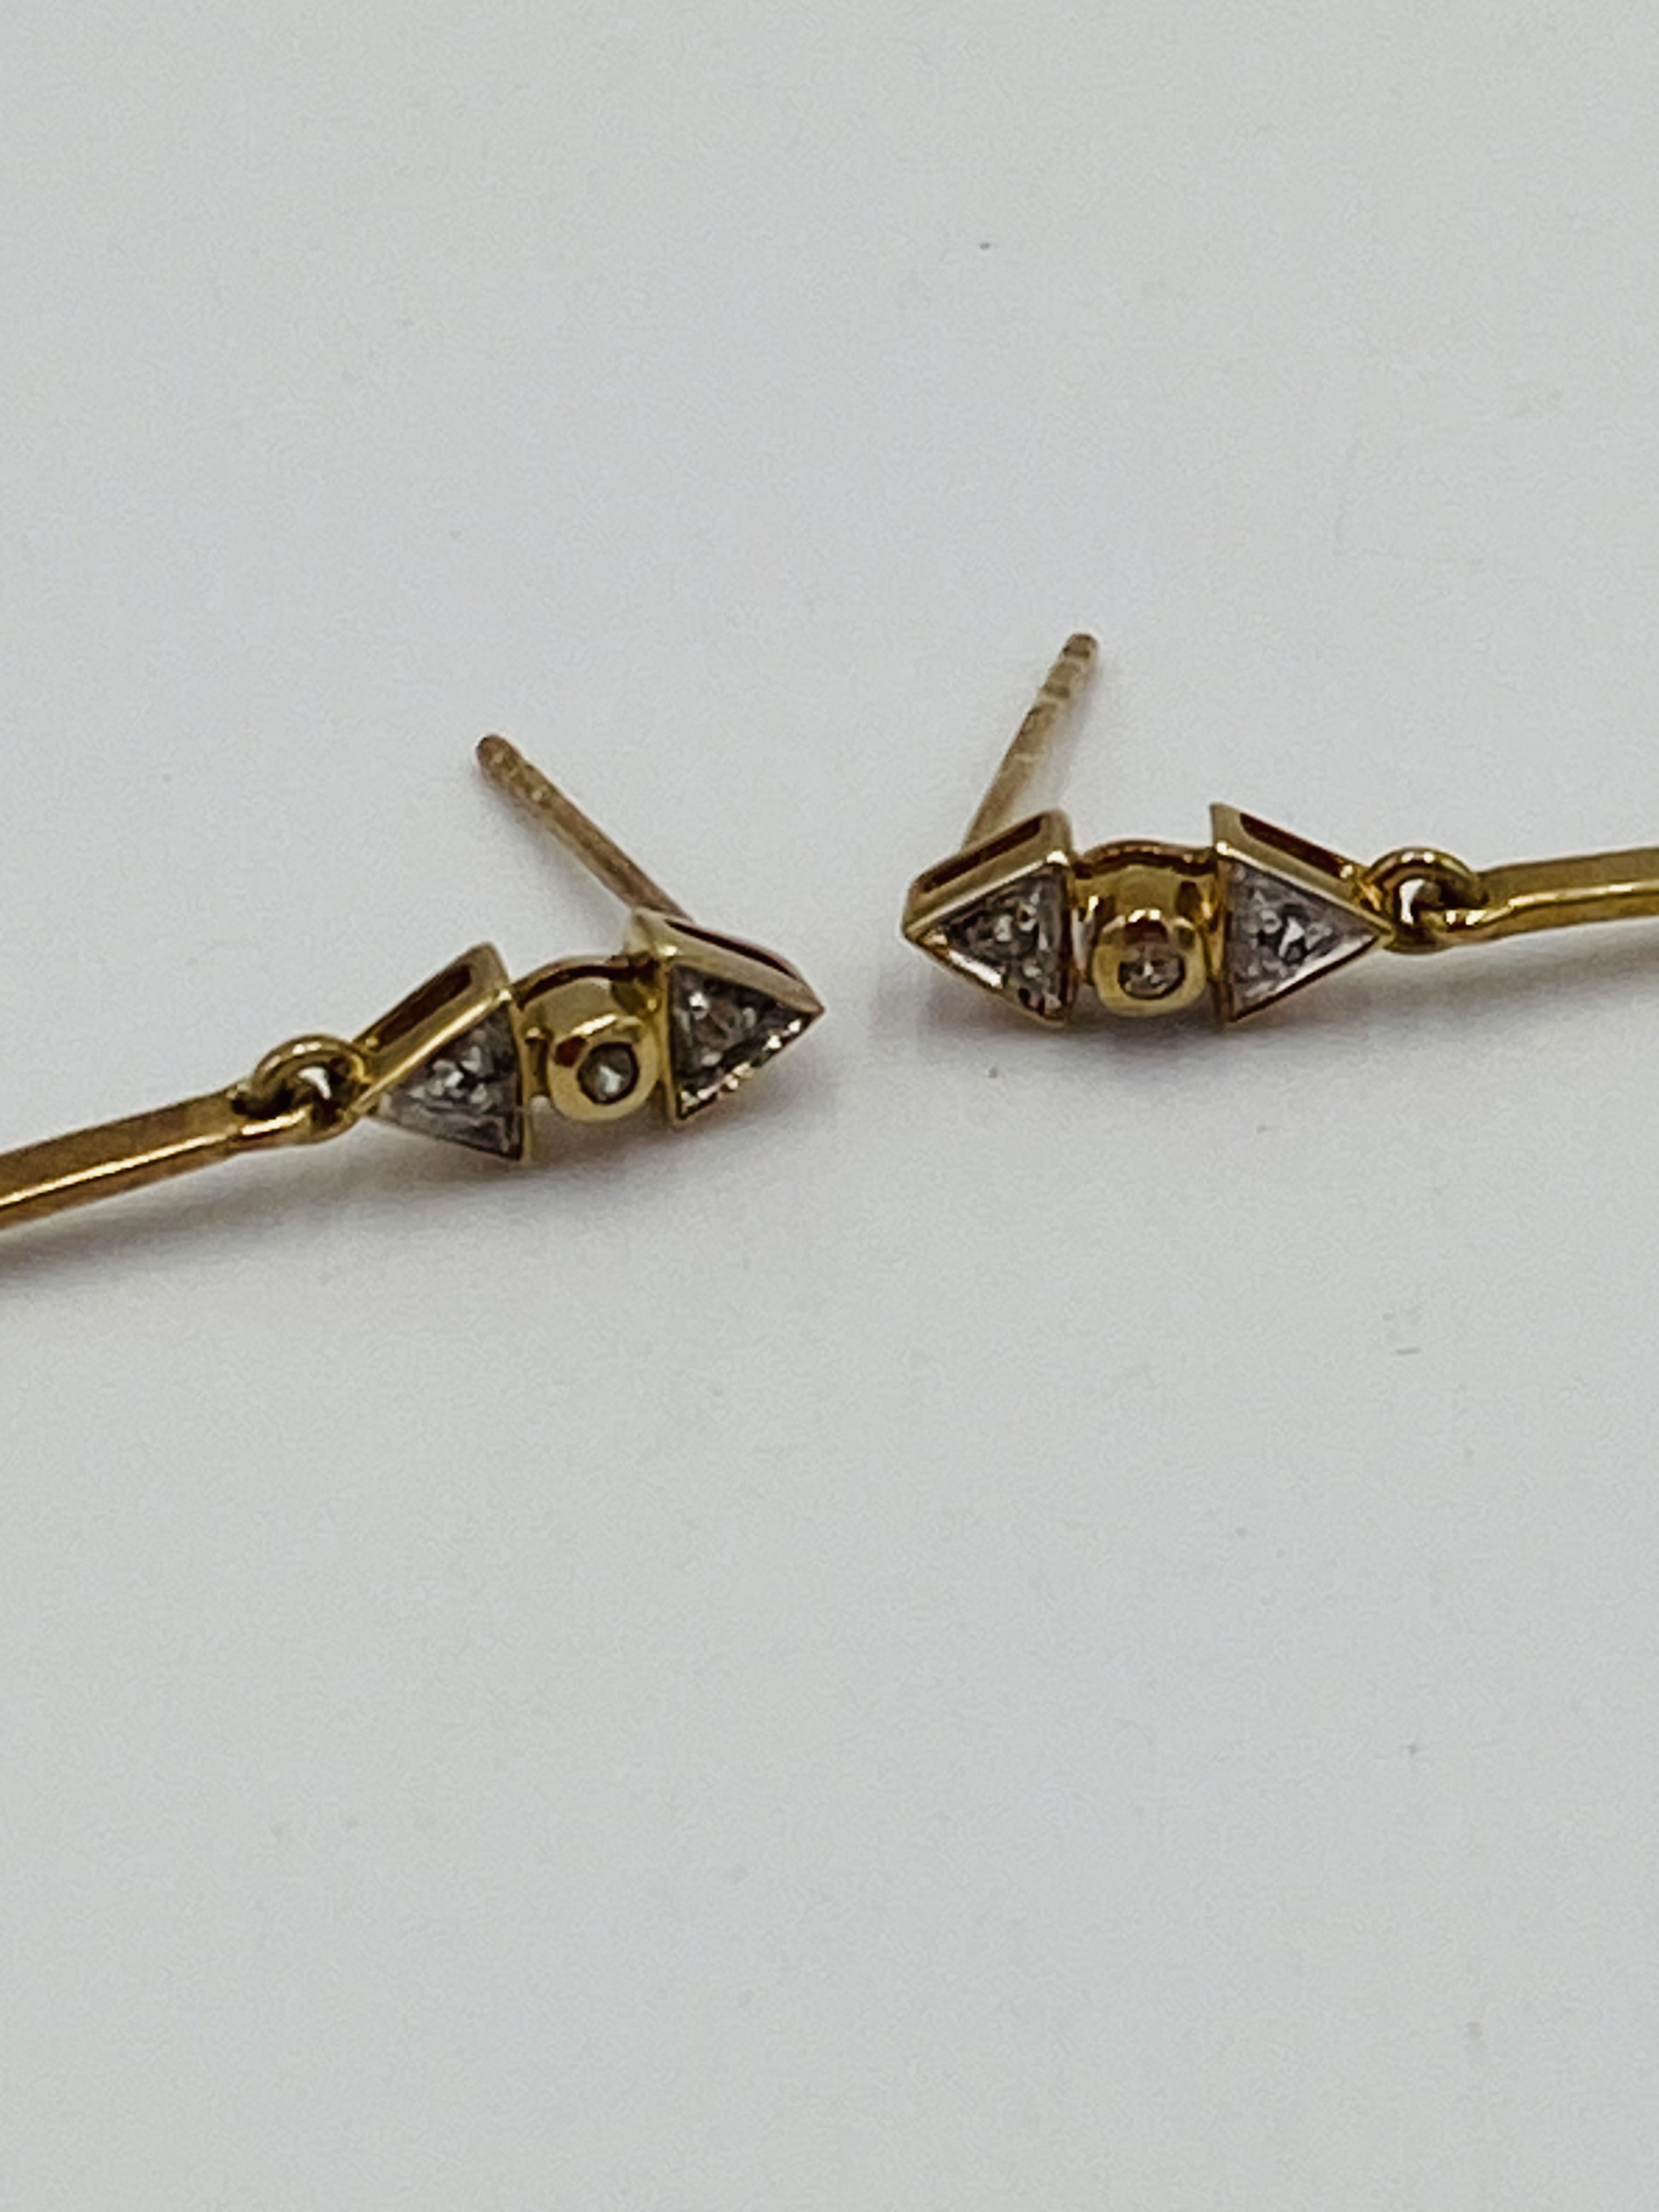 Pair of 9ct gold earrings - Image 6 of 6